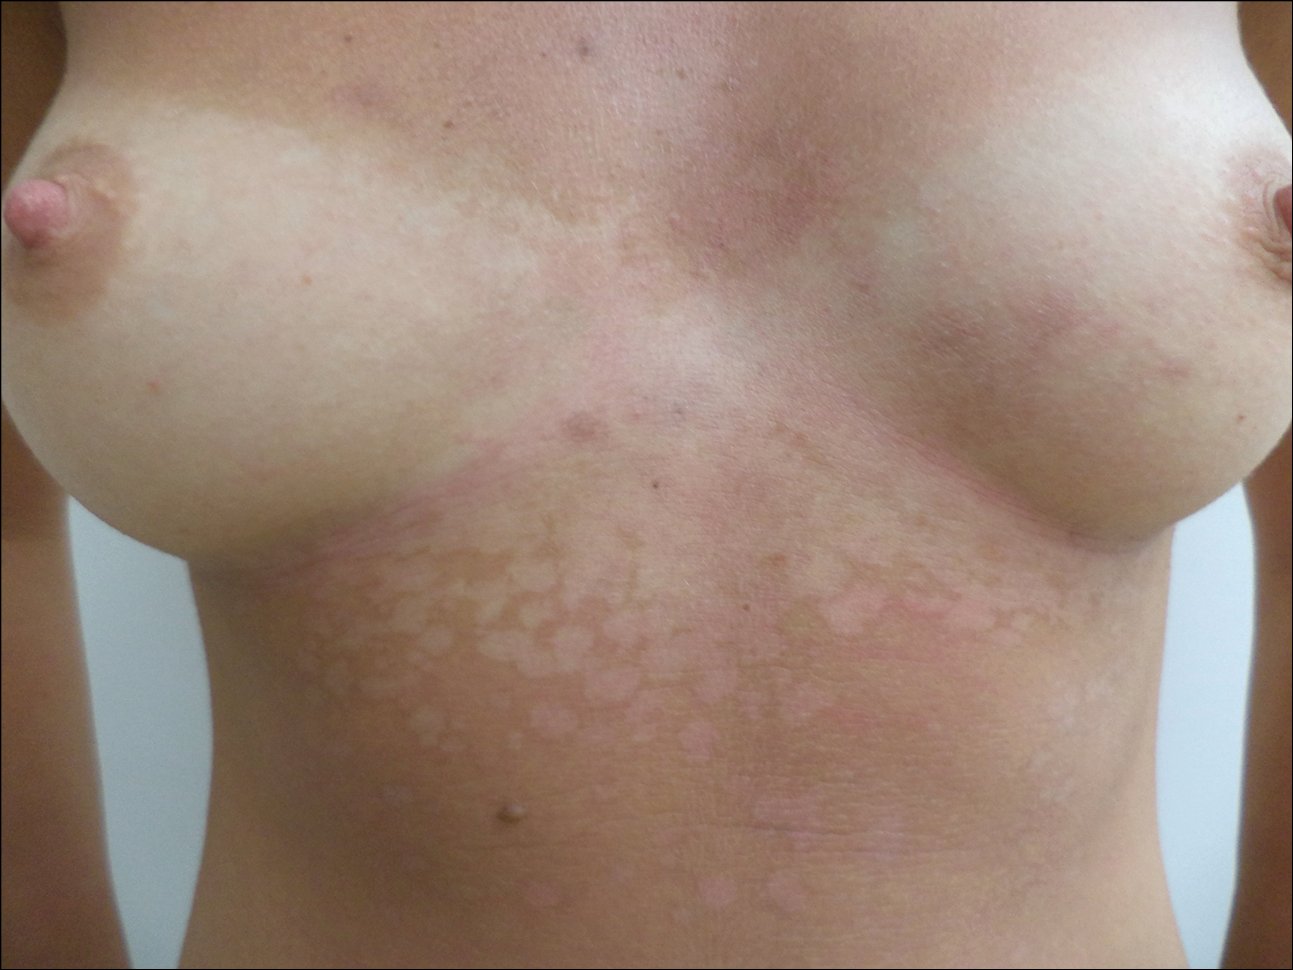 Figure 031_3616.  
Tinea versicolor. Numerous depigmented macules on the trunk, visible in summer following sun exposure. 